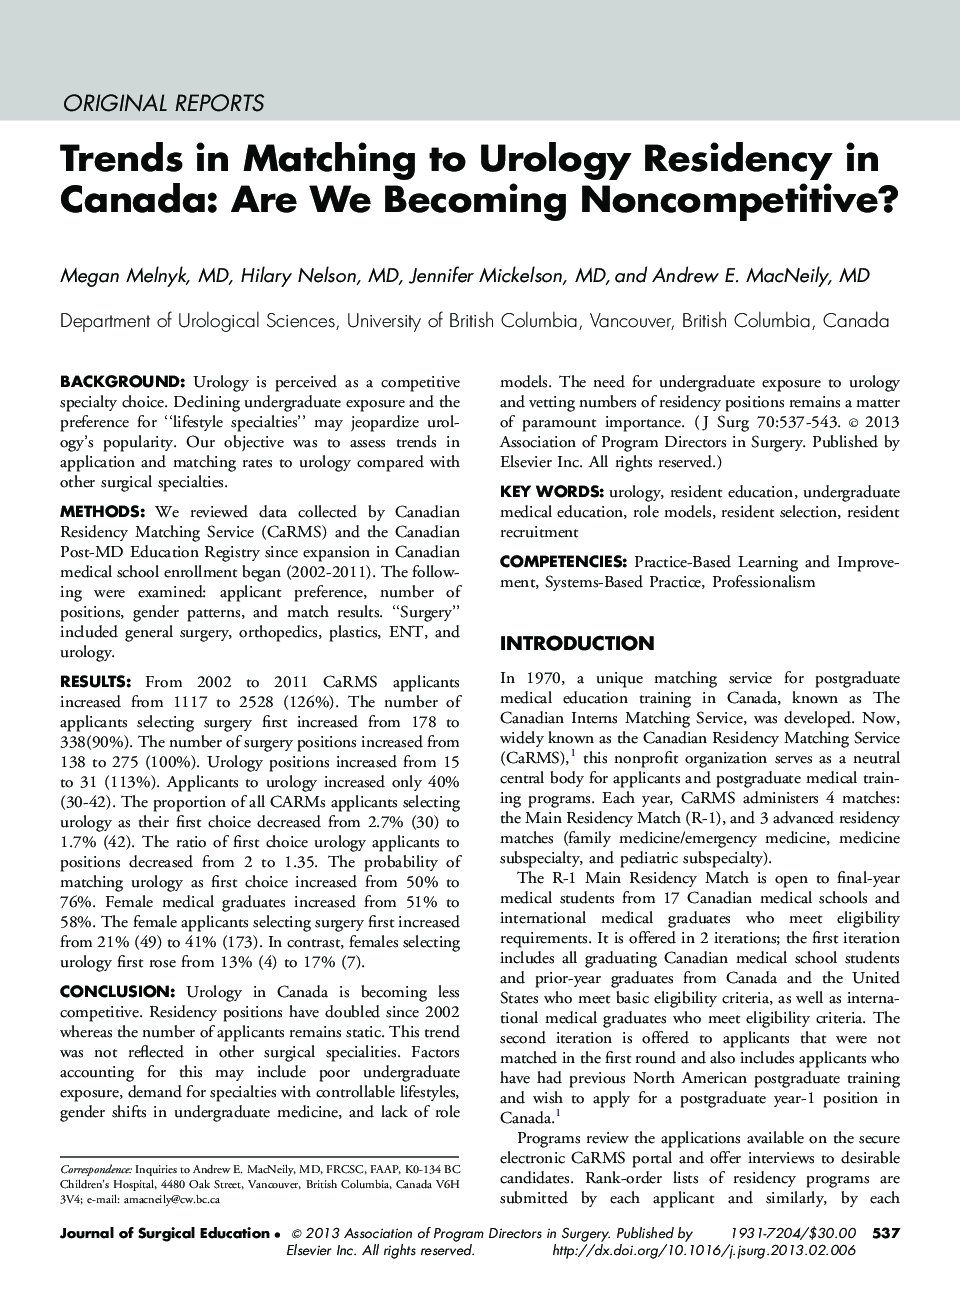 Trends in Matching to Urology Residency in Canada: Are We Becoming Noncompetitive?